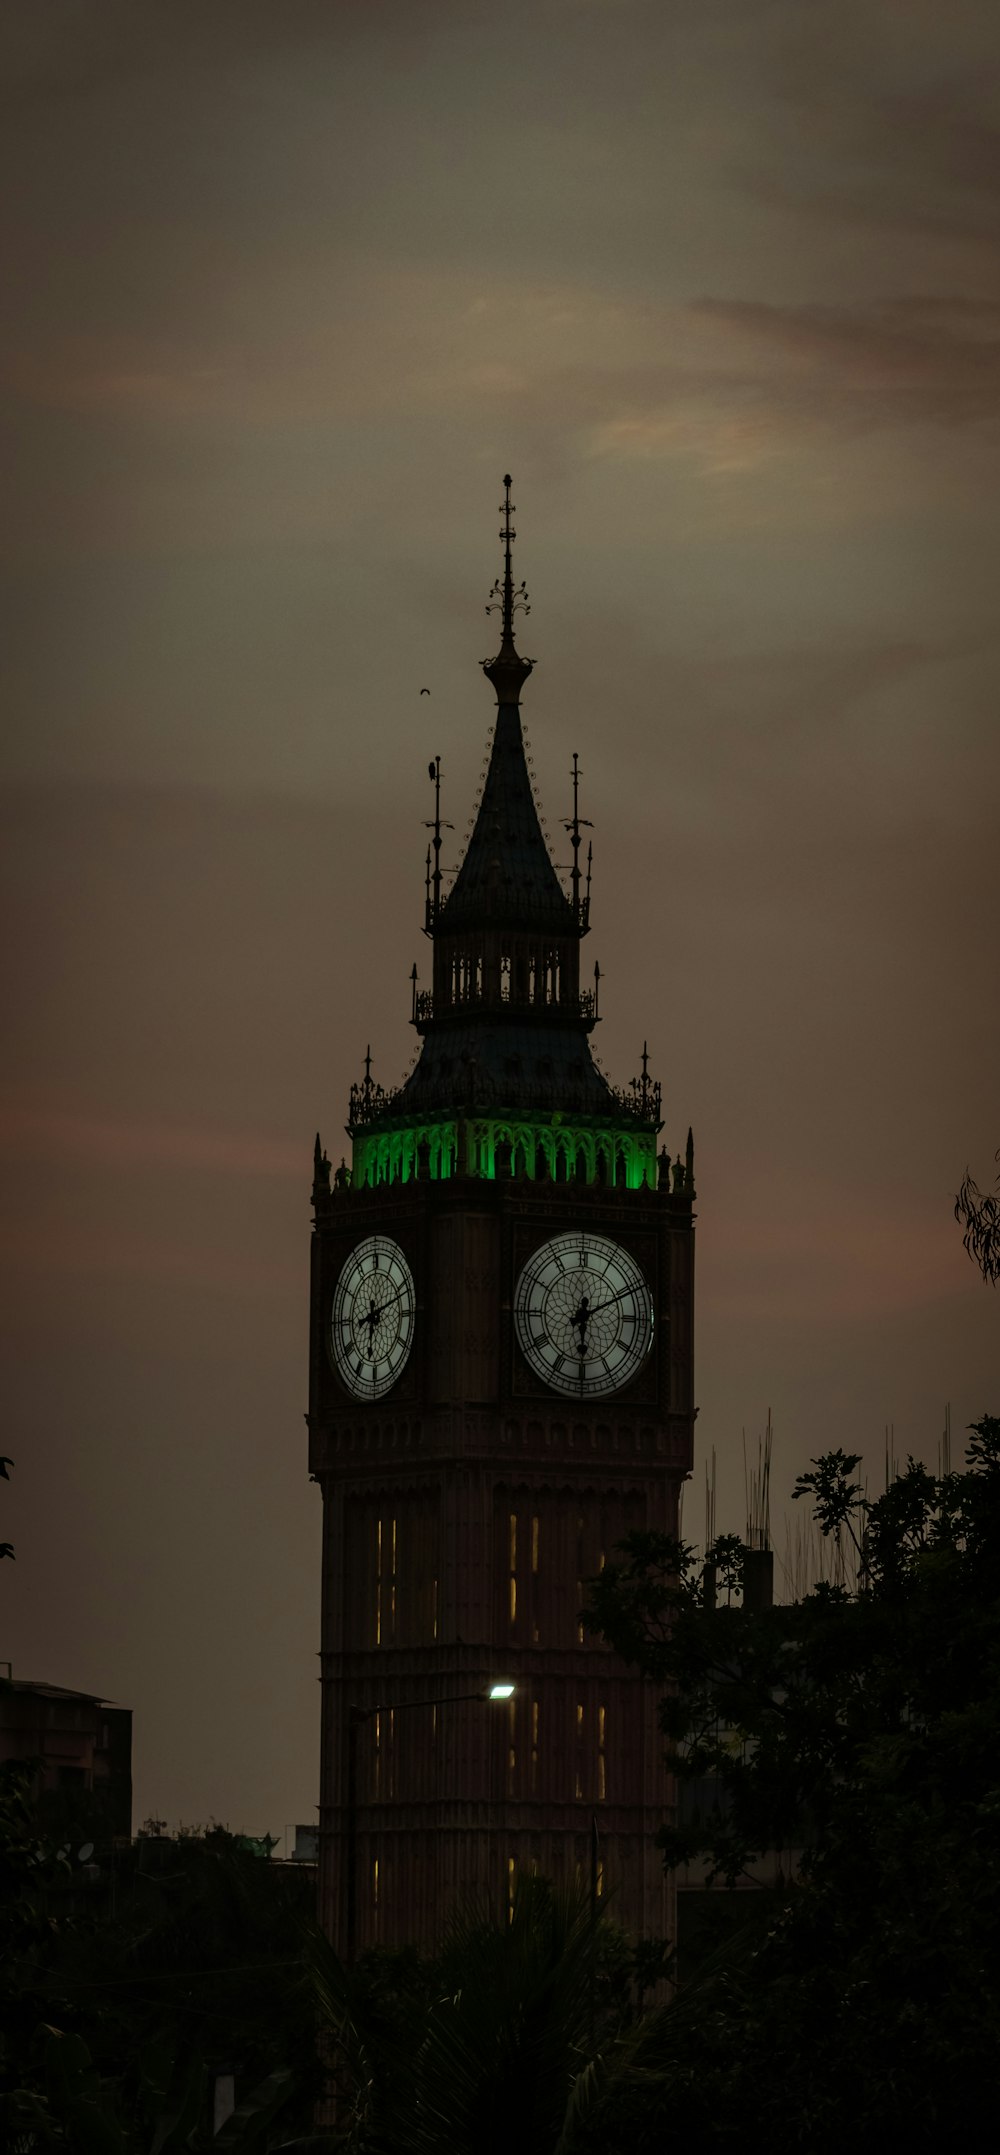 a tall clock tower with a green light on top of it